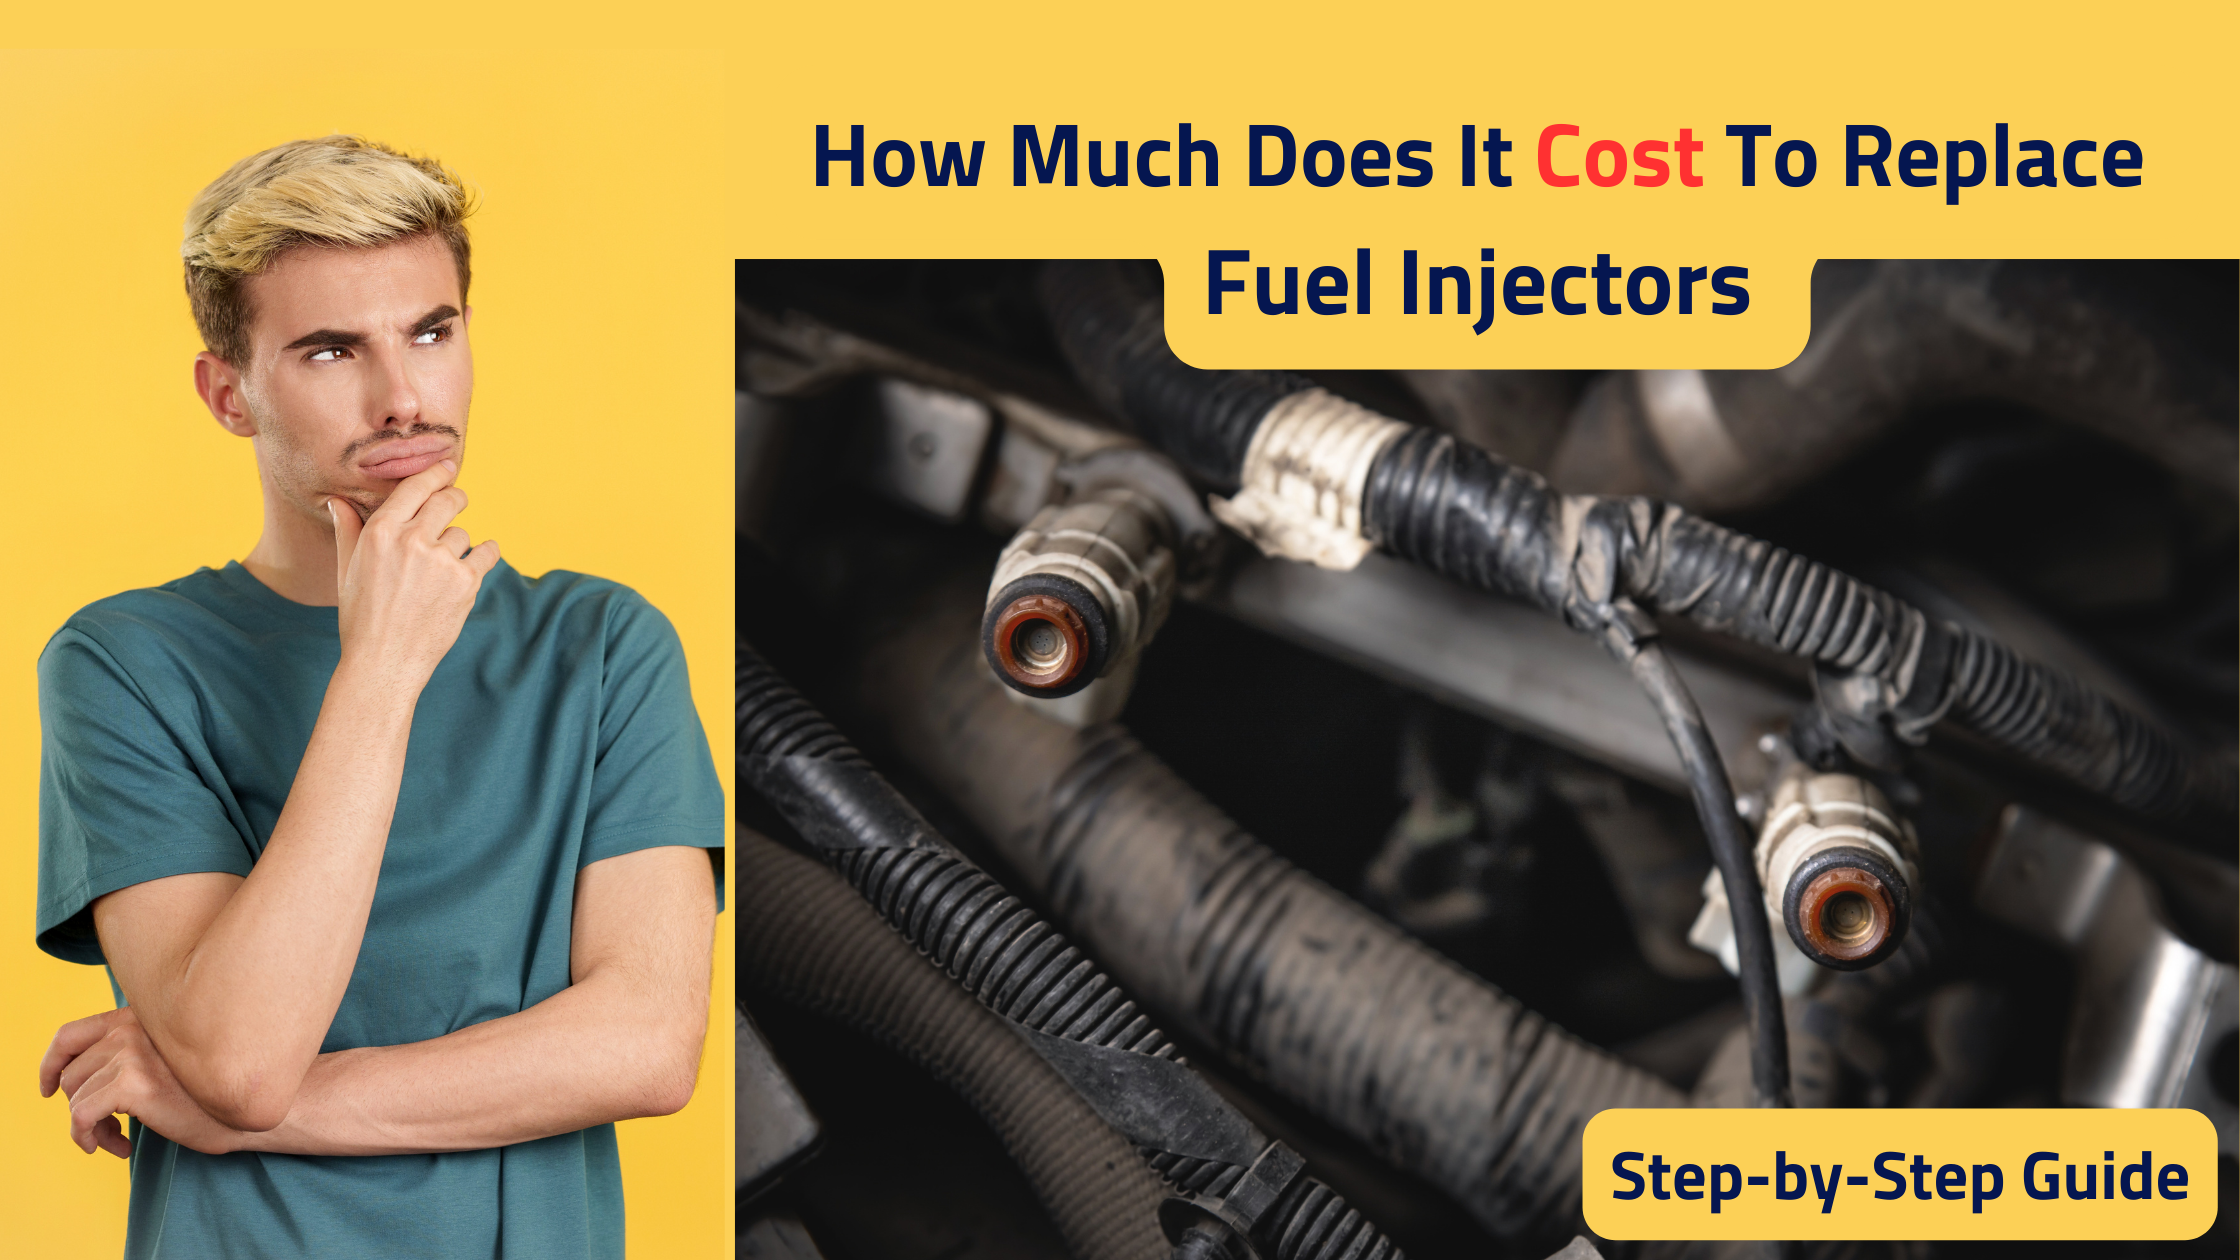 How Much Does It Cost To Replace Fuel Injectors